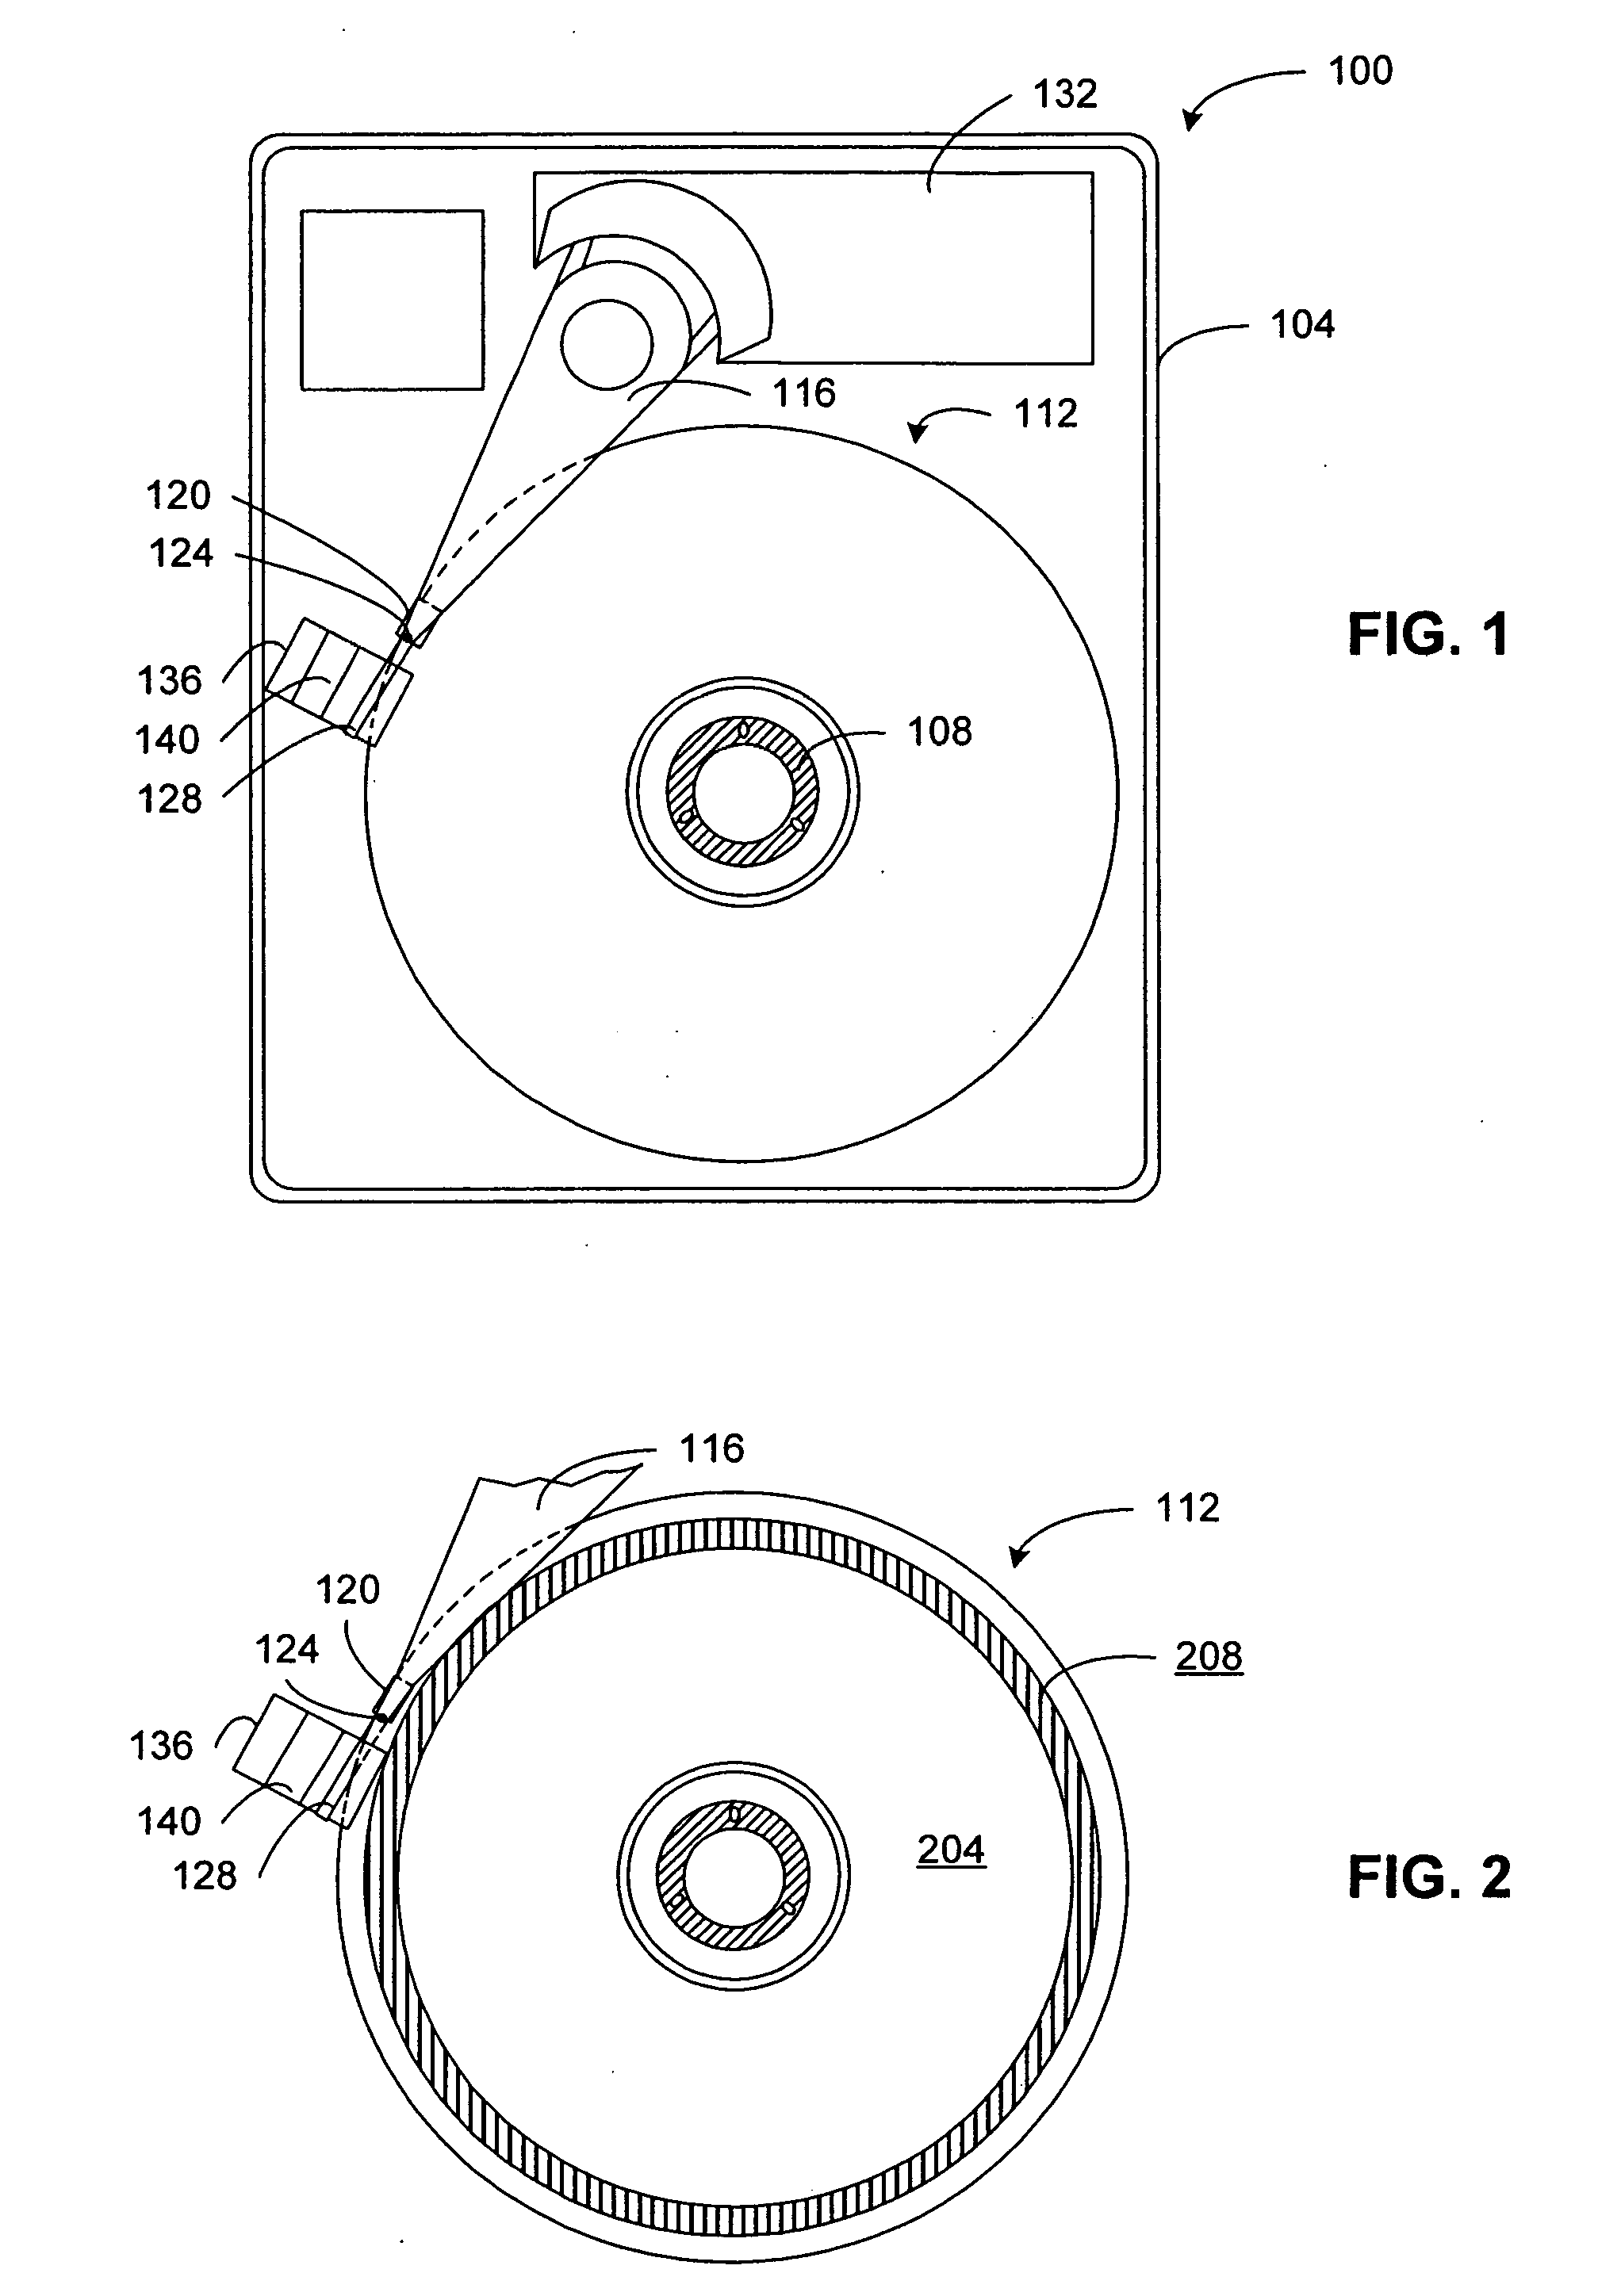 Method of configuring storage space in a data storage device